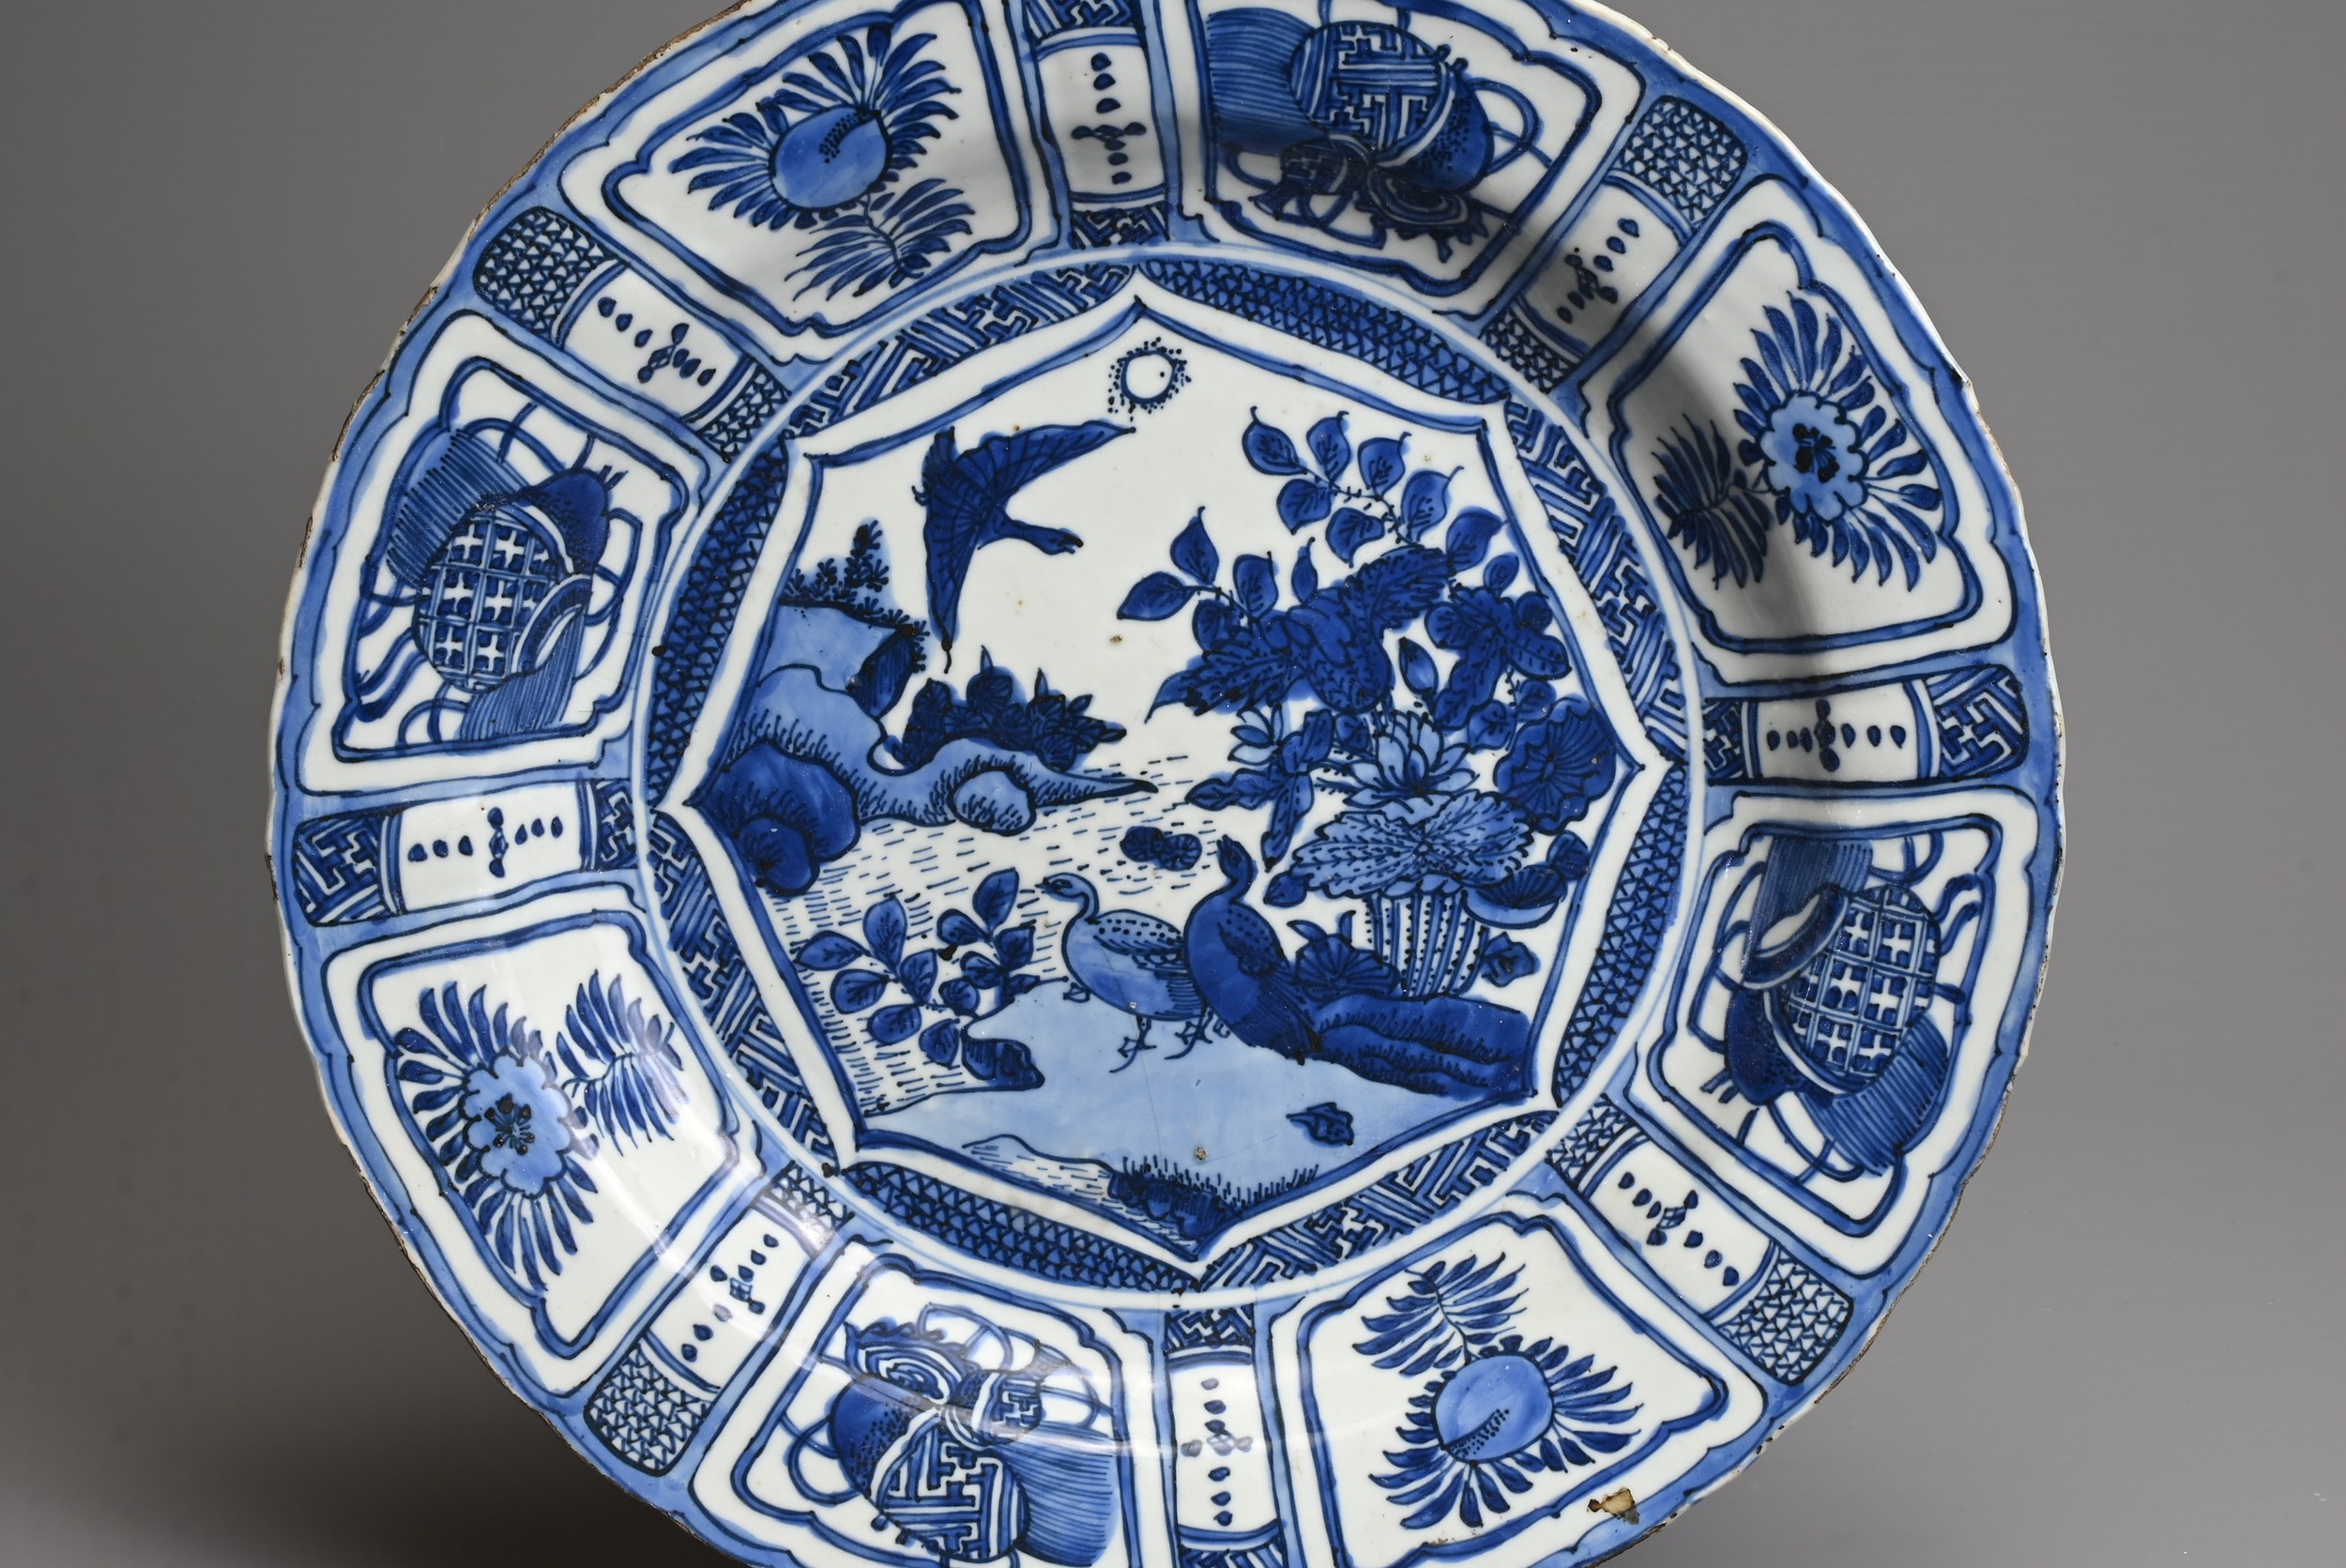 A CHINESE BLUE AND WHITE PORCELAIN KRAAK DISH, MING DYNASTY. Decorated with ducks at a lotus pond - Image 2 of 6